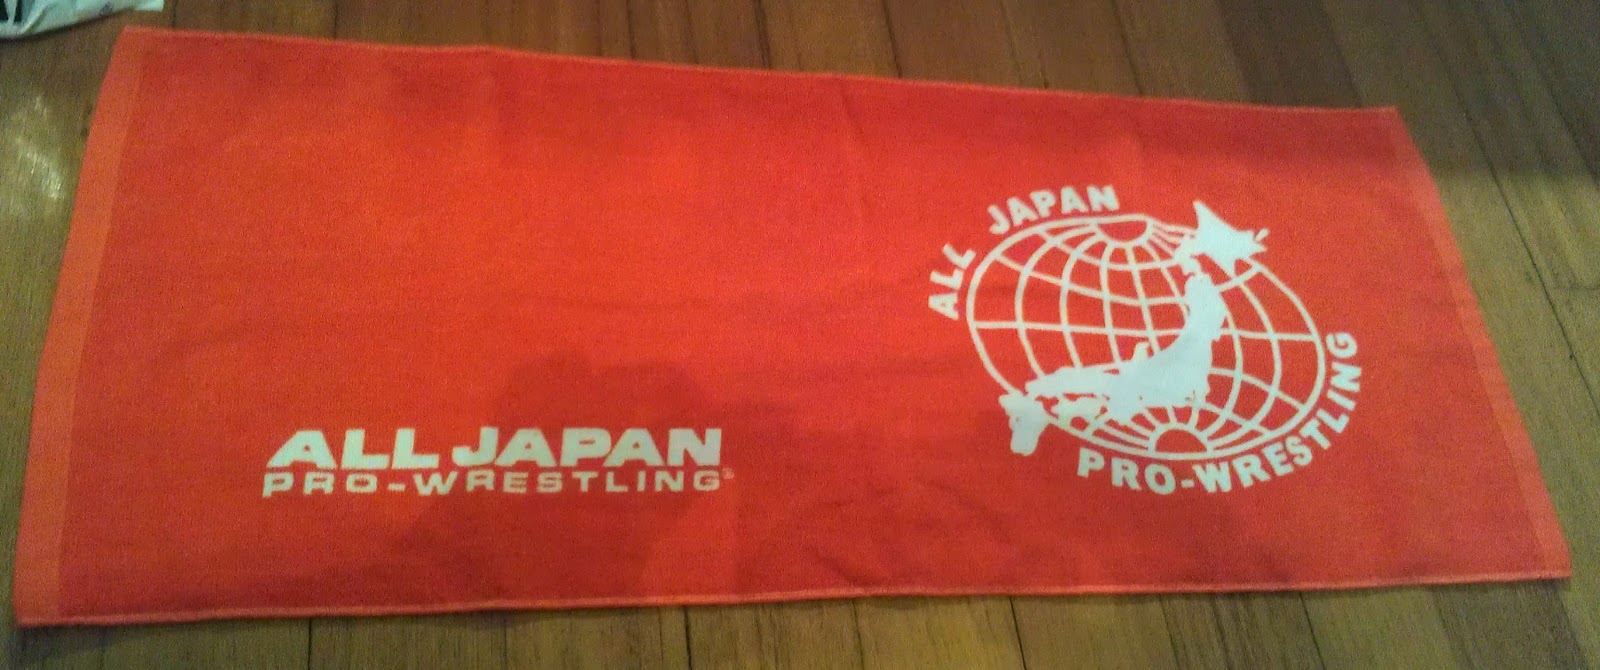 Puroresu, vinyl records and quite a lot of beer - my 8 days in Japan